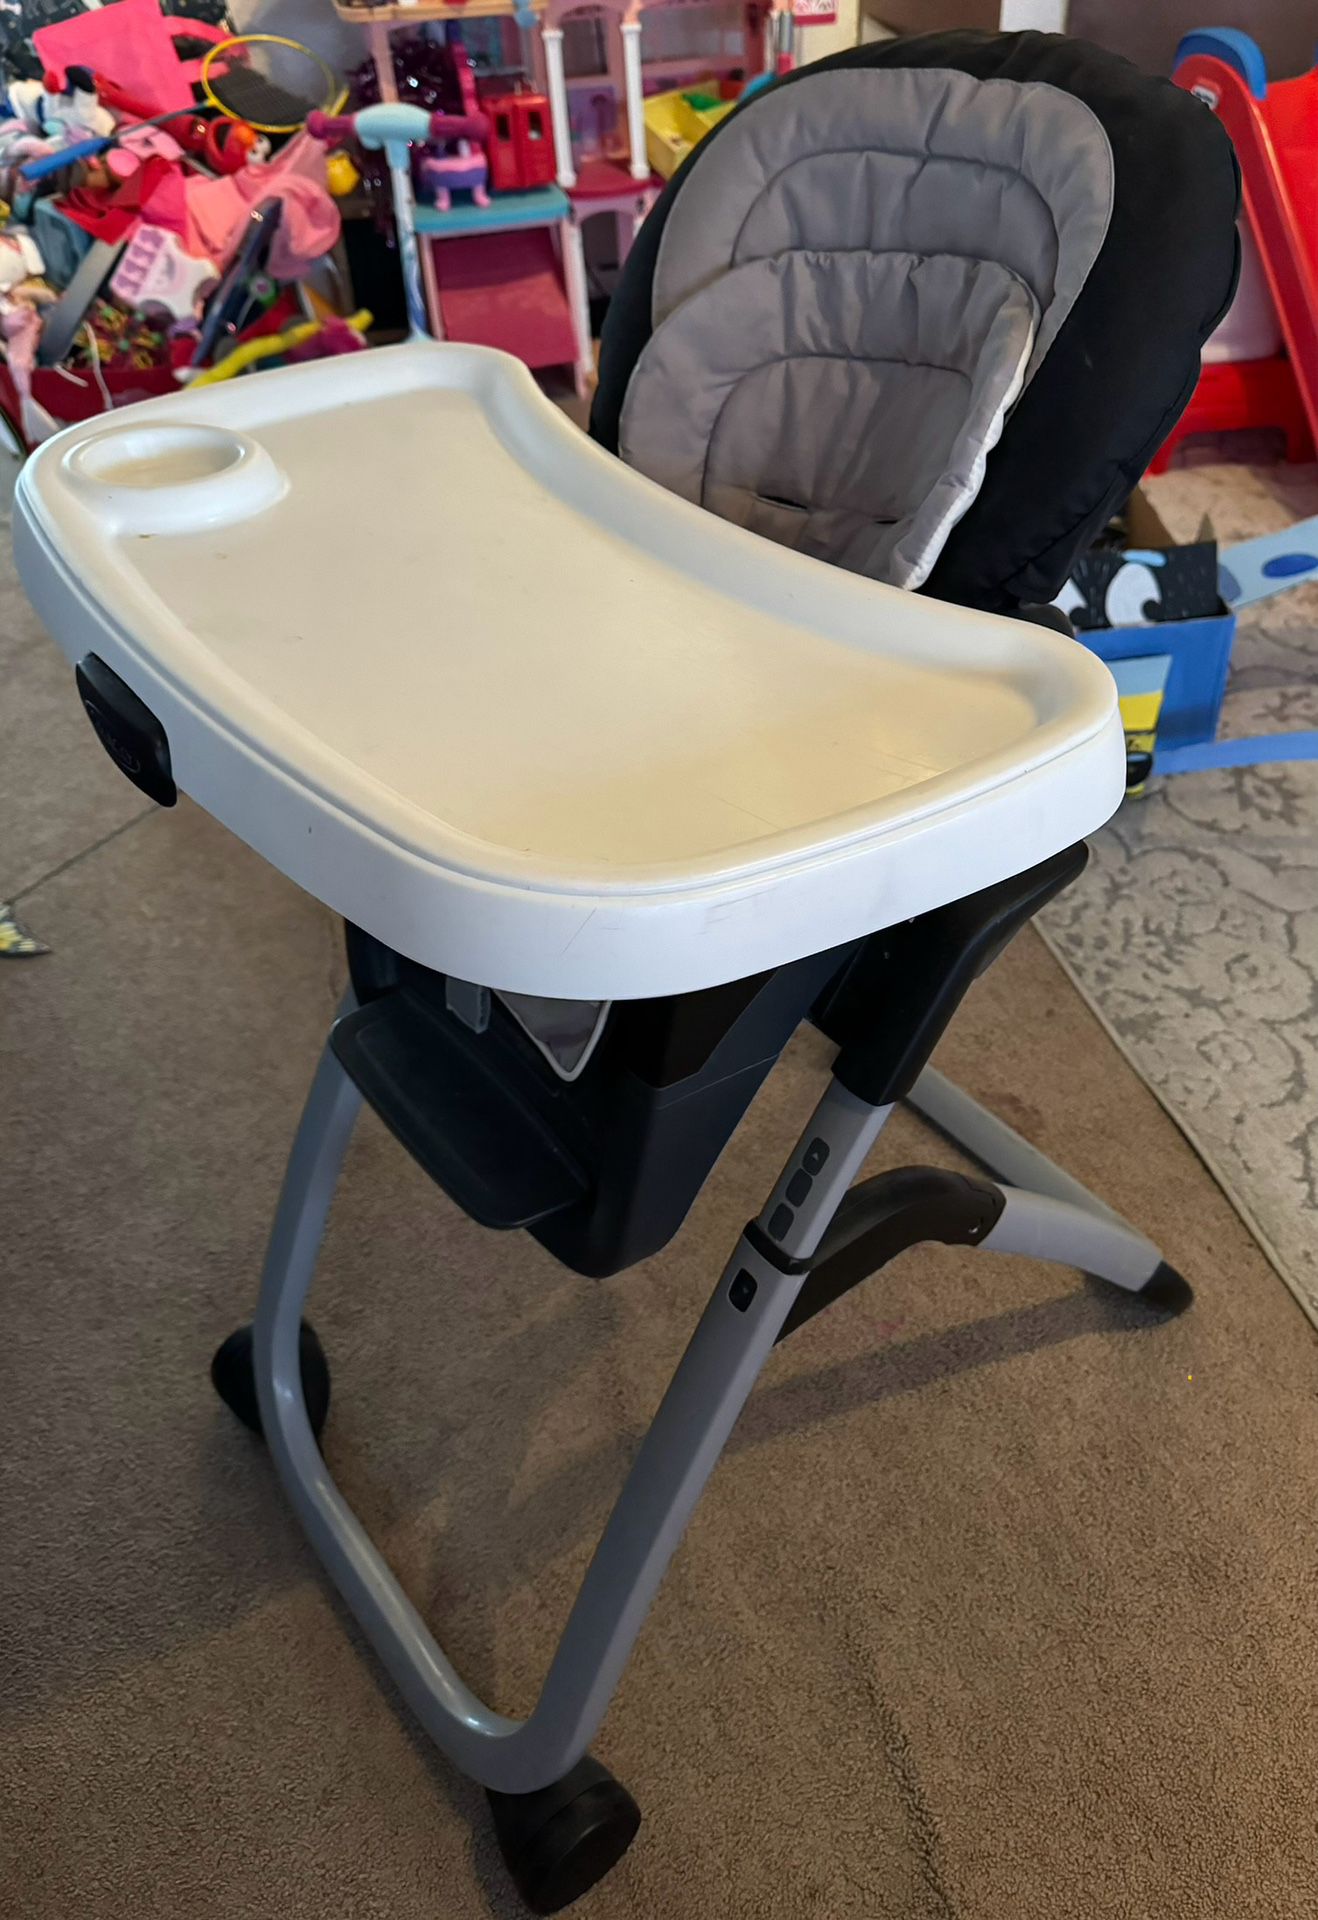 High Chair For Sale!